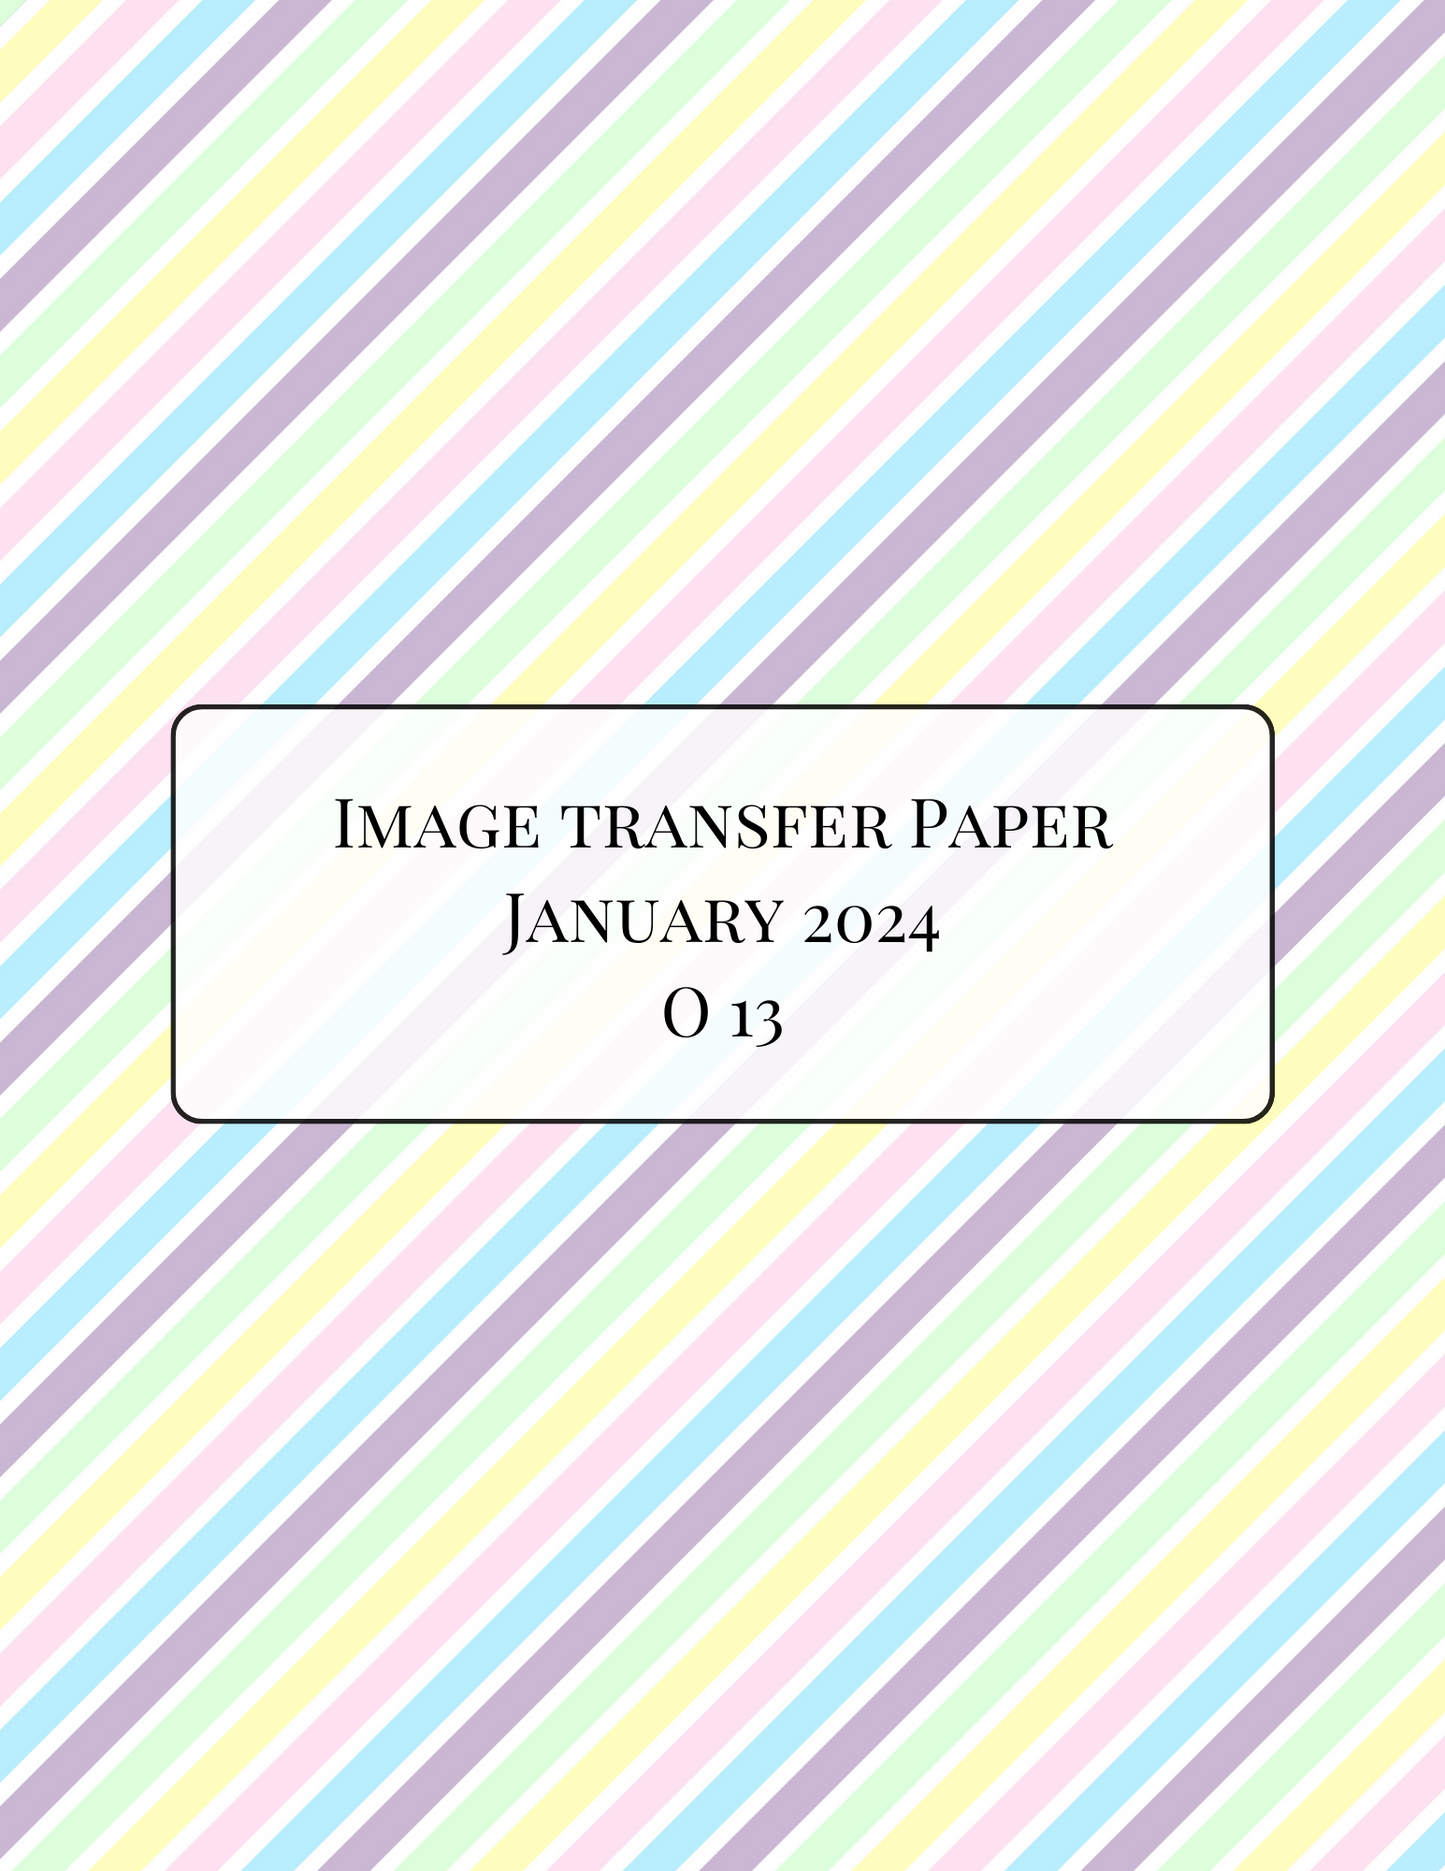 O13 Transfer Paper - January Launch